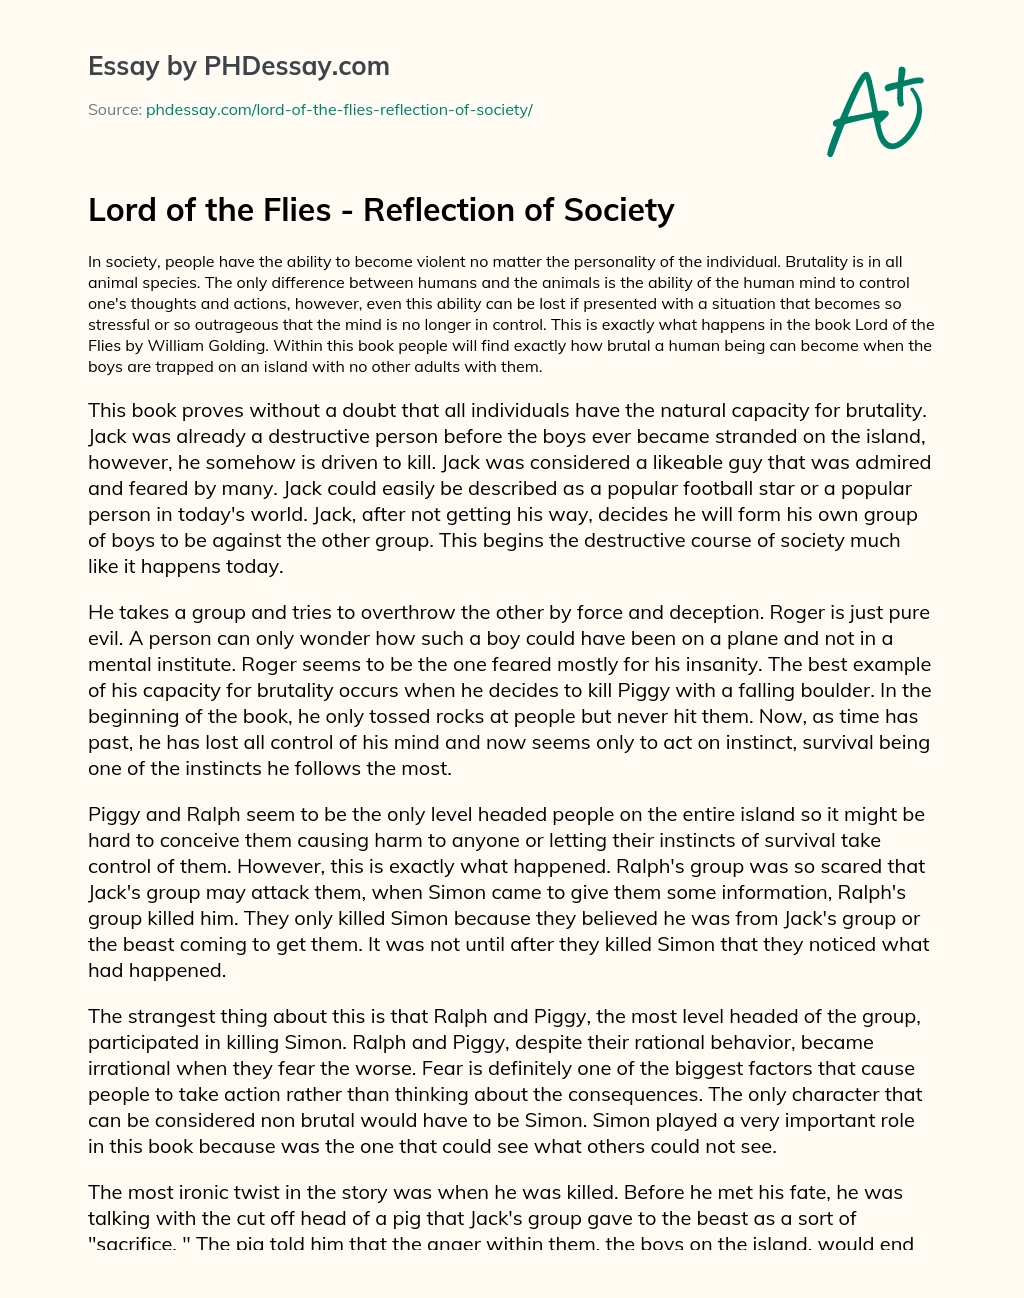 Реферат: Psychology In Lord Of The Flies Essay